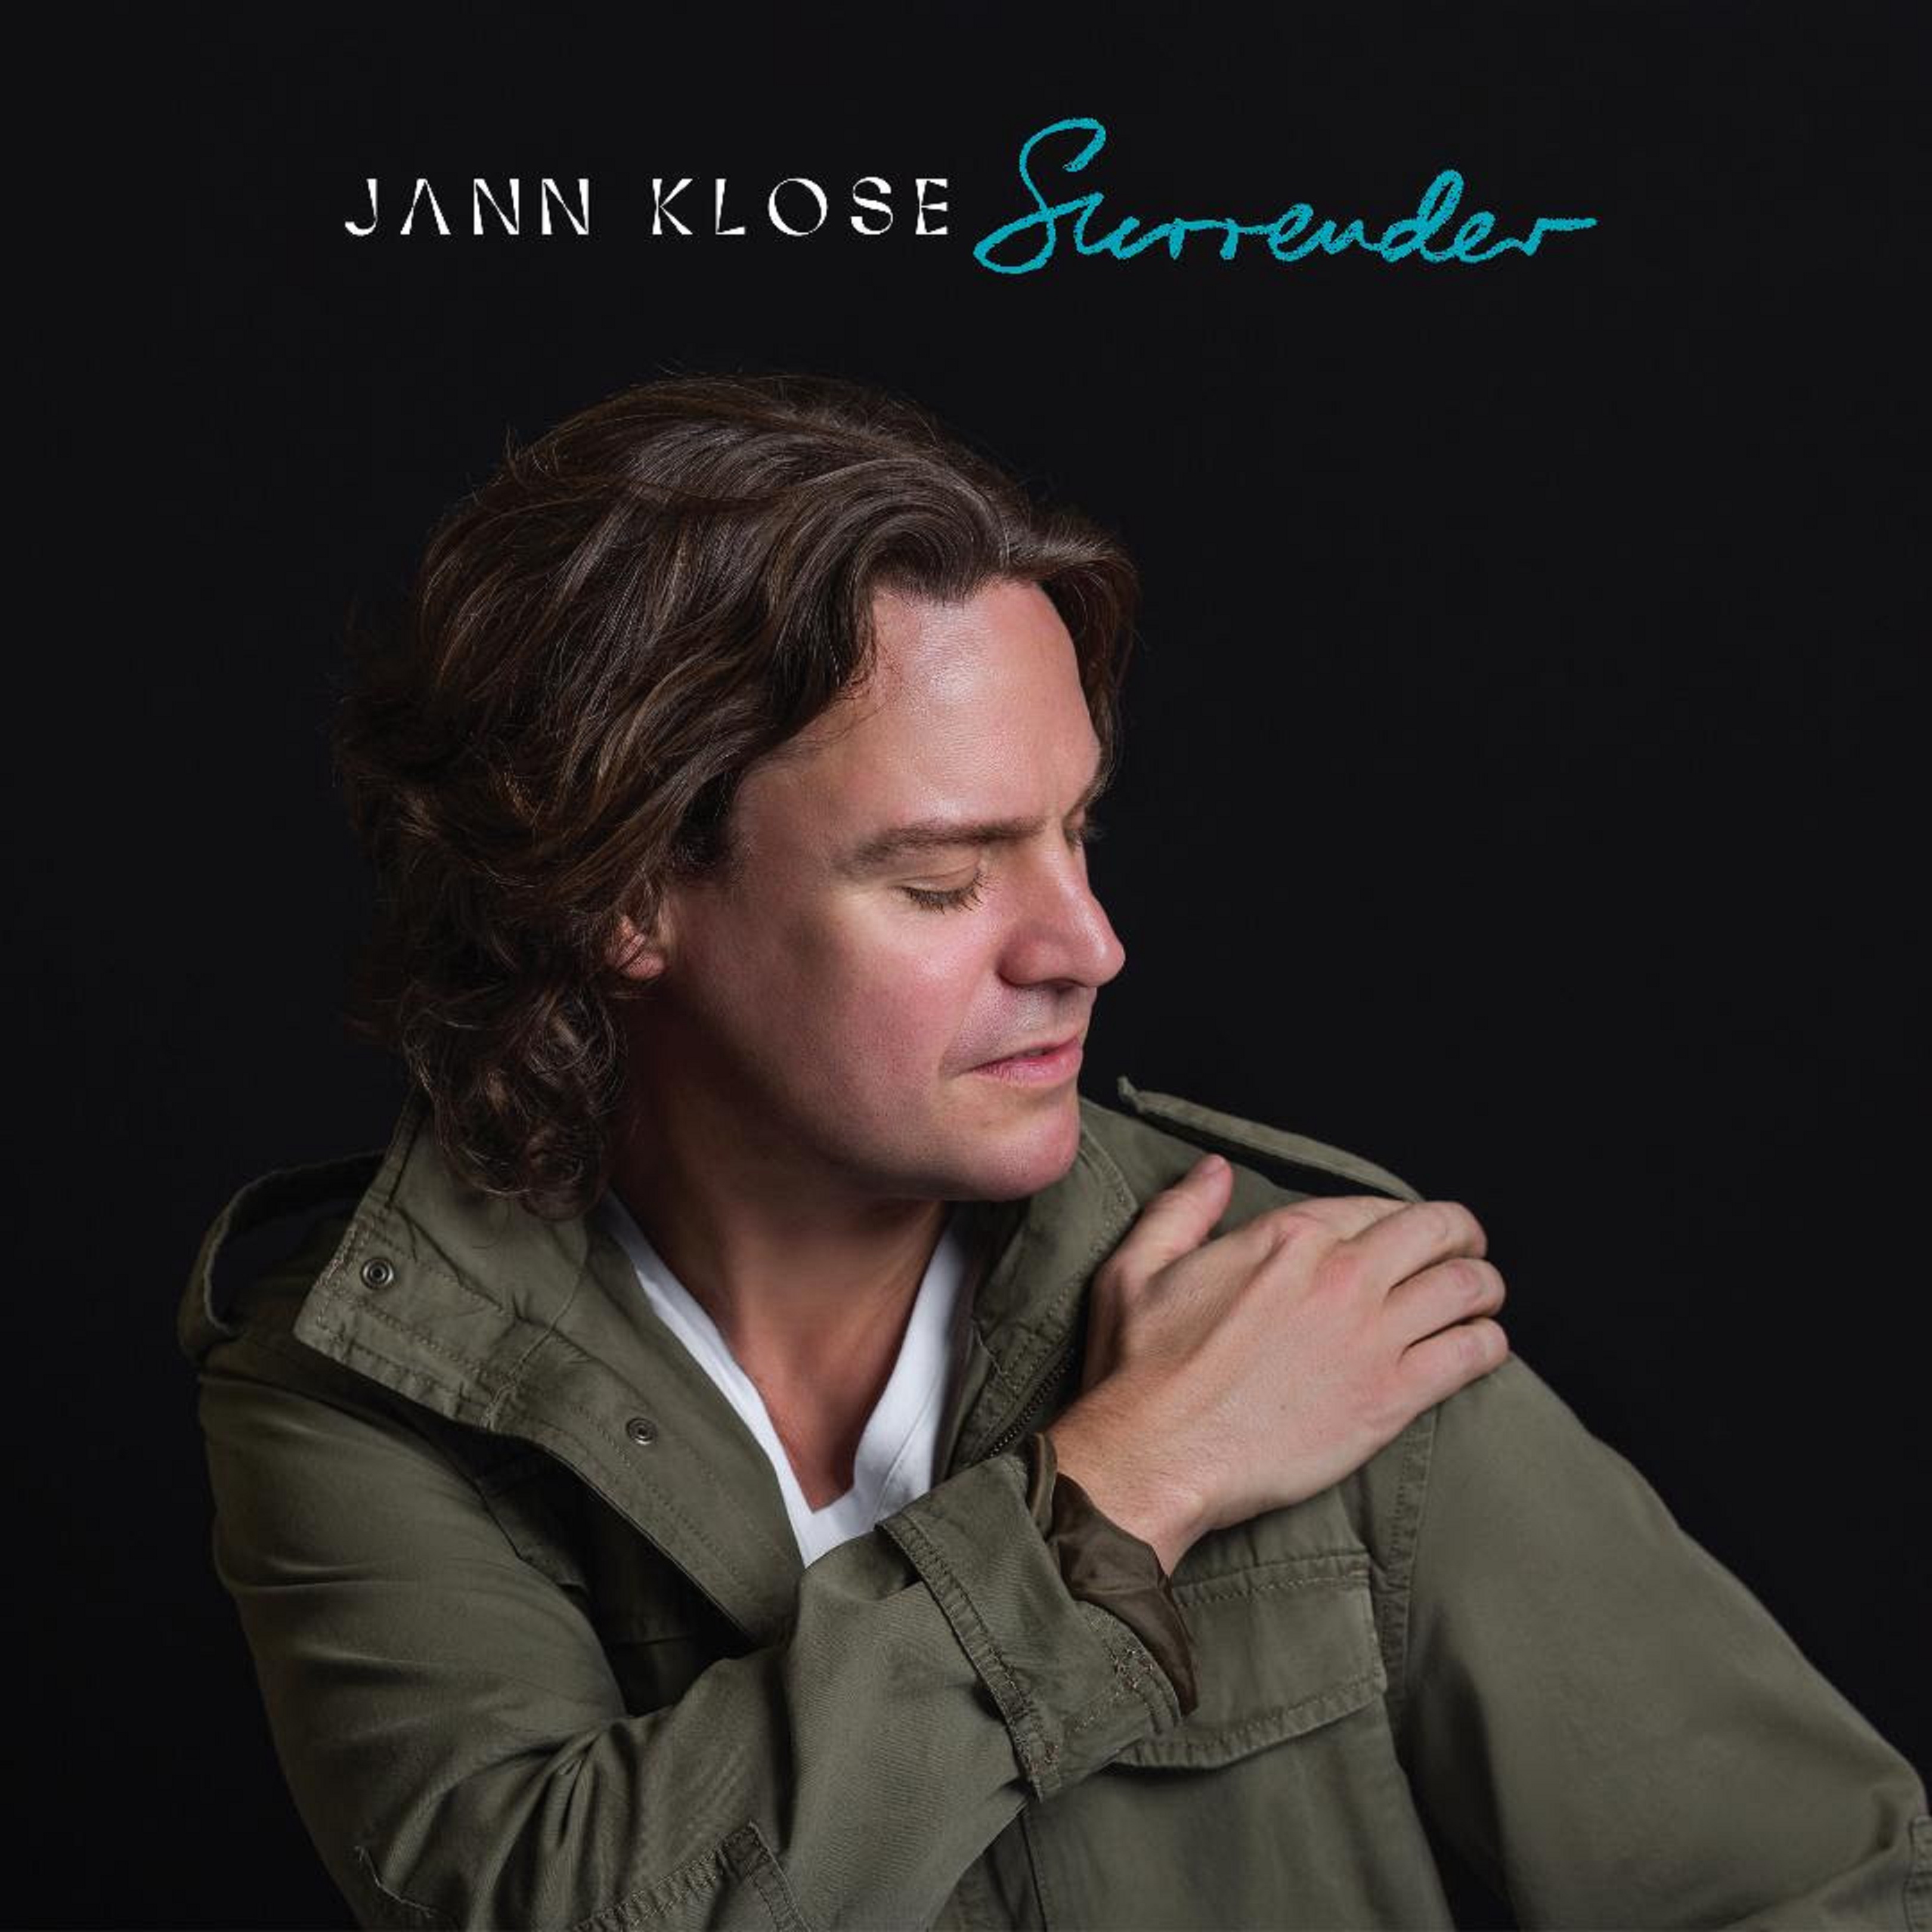 Coming February 10: “Surrender,” the single and title track from Jann Klose’s Forthcoming Studio Album